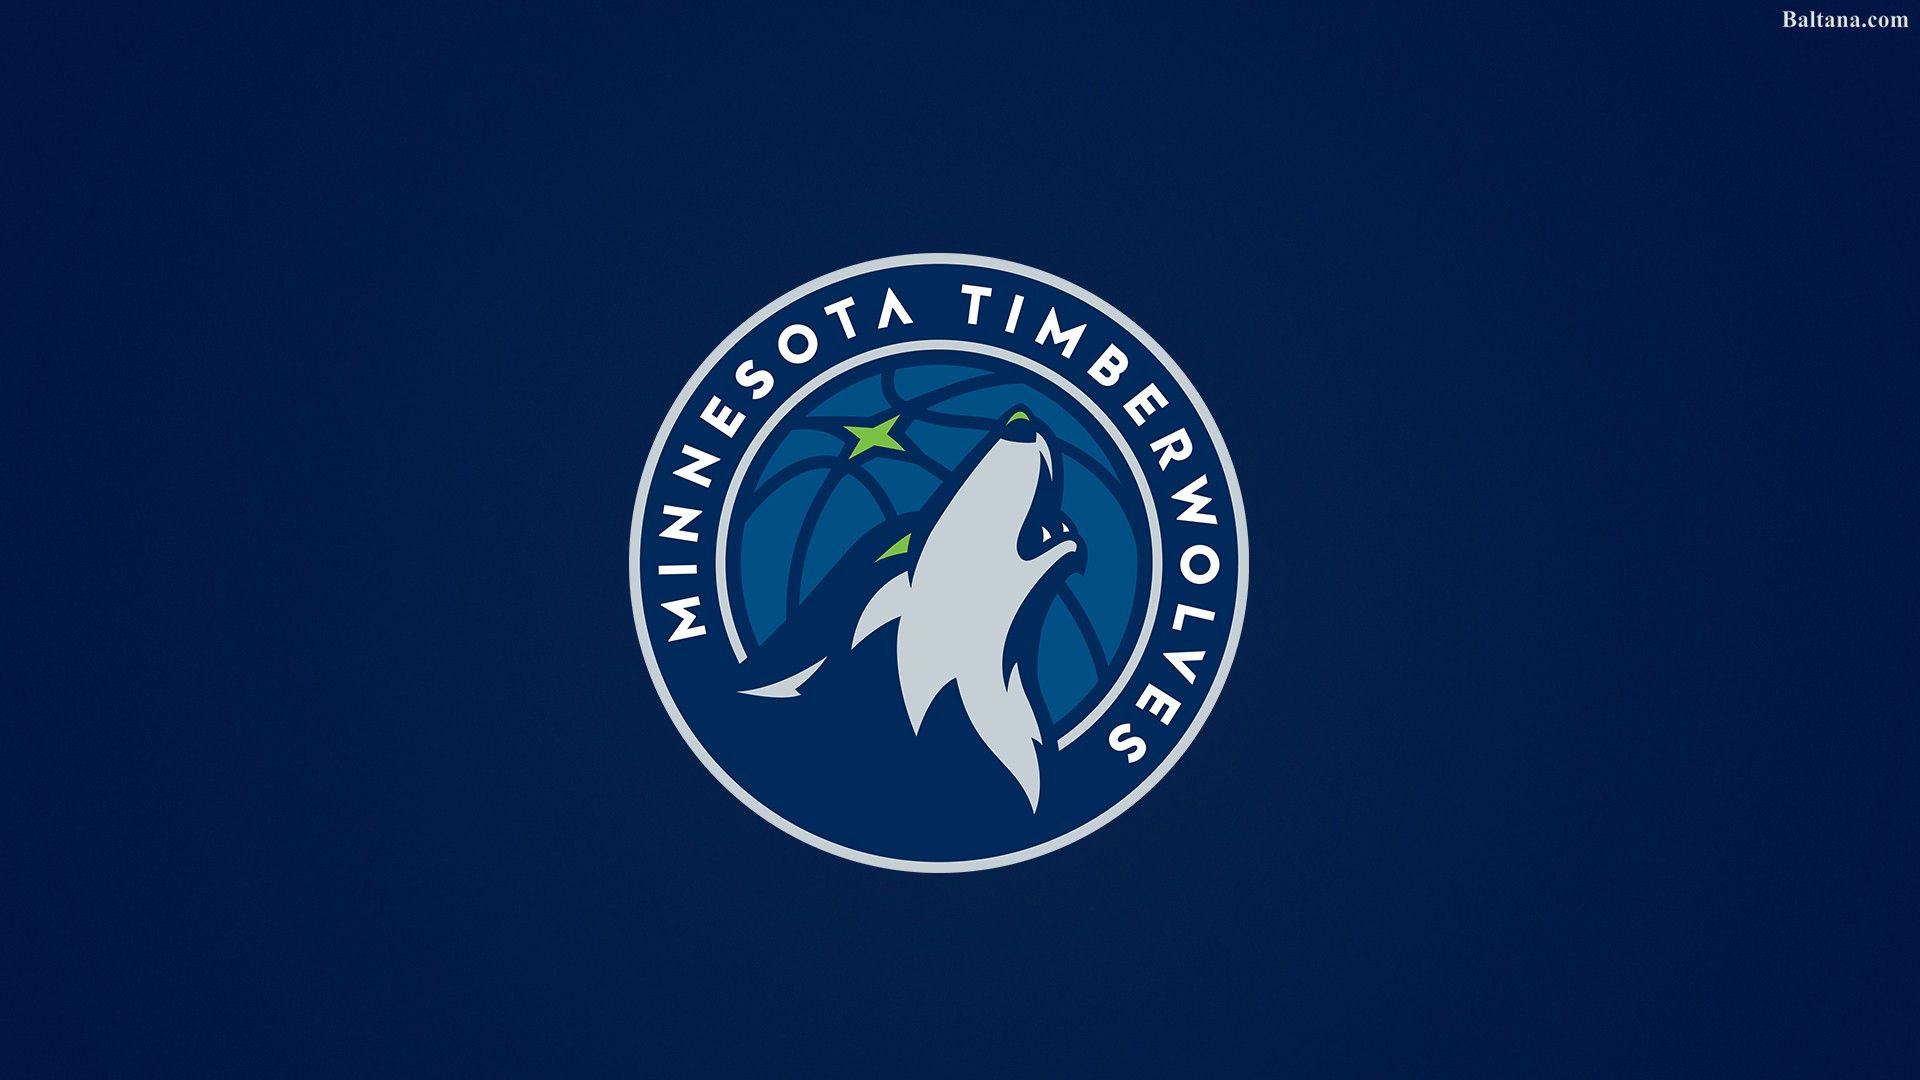 Minnesota Timberwolves picture free download